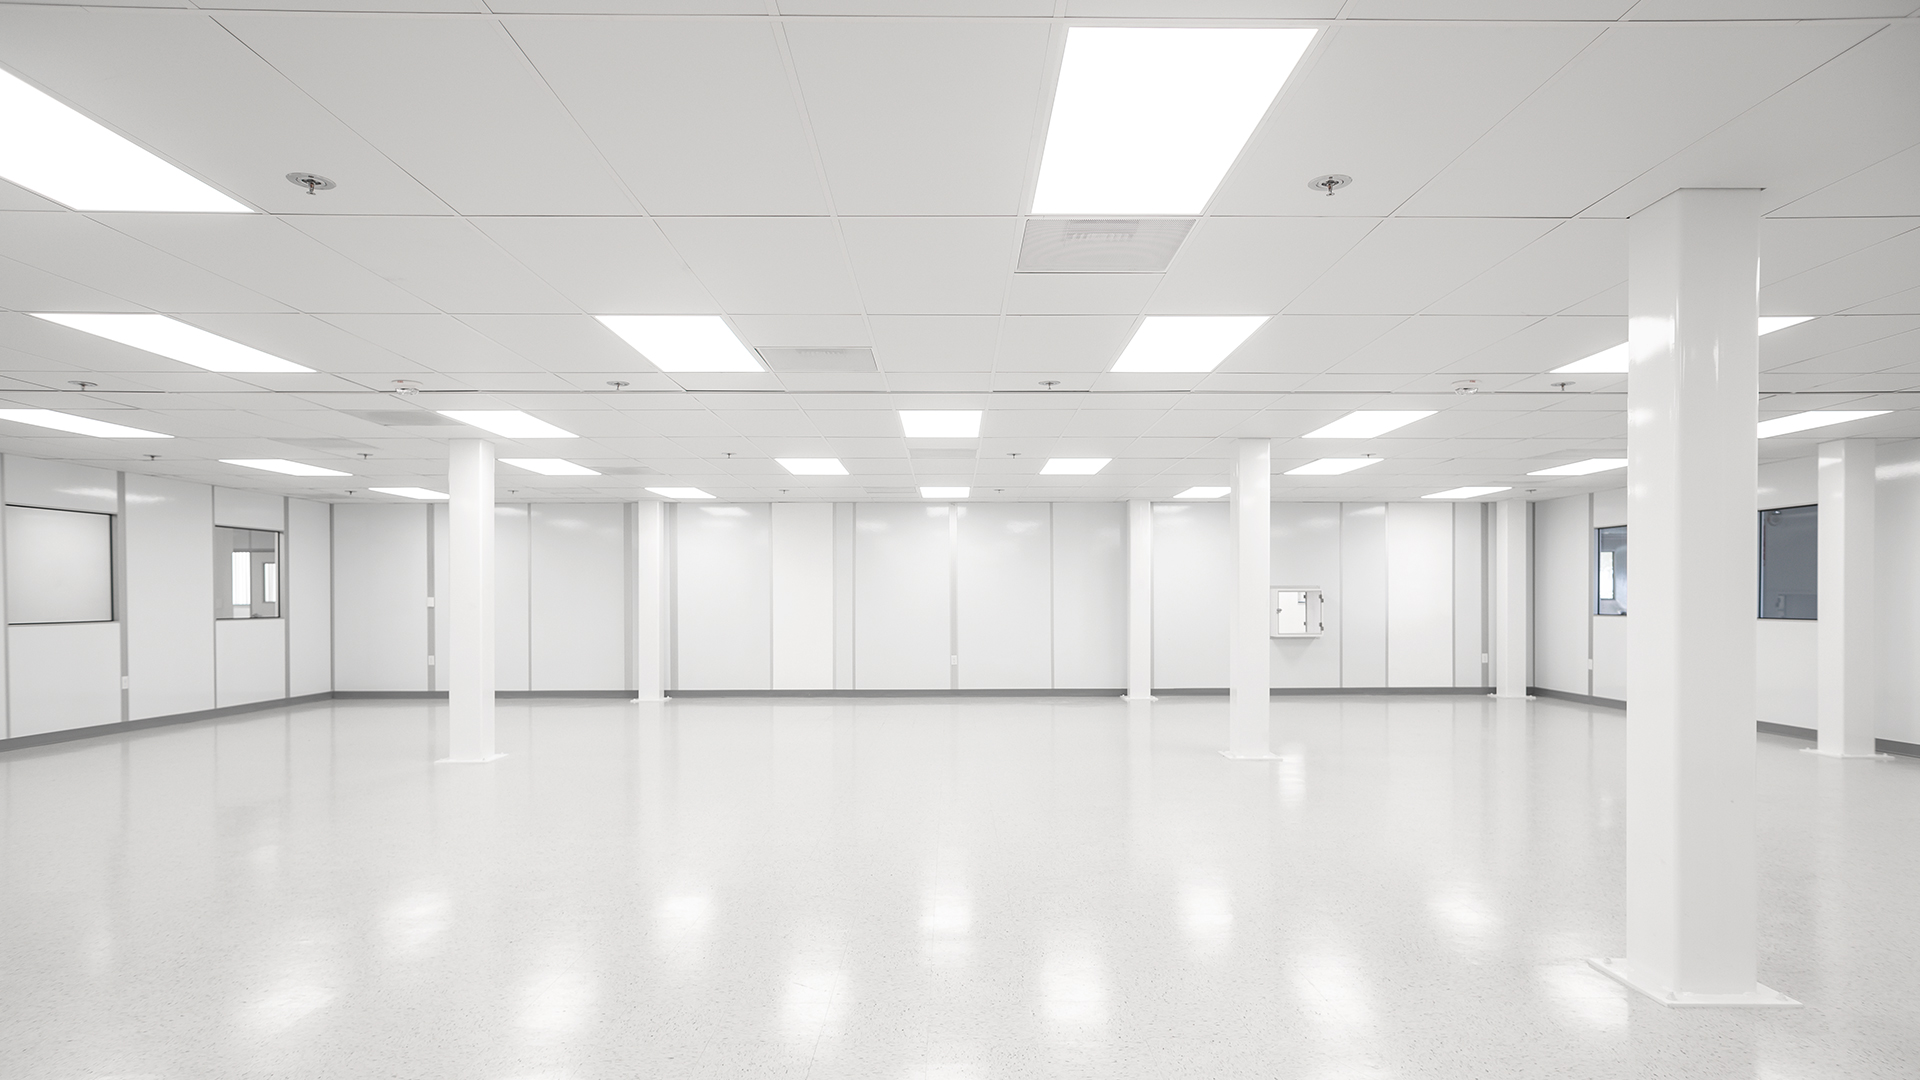 Modular Cleanroom by allied cleanrooms Modular Cleanroom by allied cleanrooms Clean room by Allied Cleanrooms Supplier - USP 797, and ISO 4, ISO 5, ISO 6, ISO 7, and IS0 8, cGMP cleanroom manufacturing, soft wall cleanrooms FED-STD-209E and ISO 14644-1, control contamination